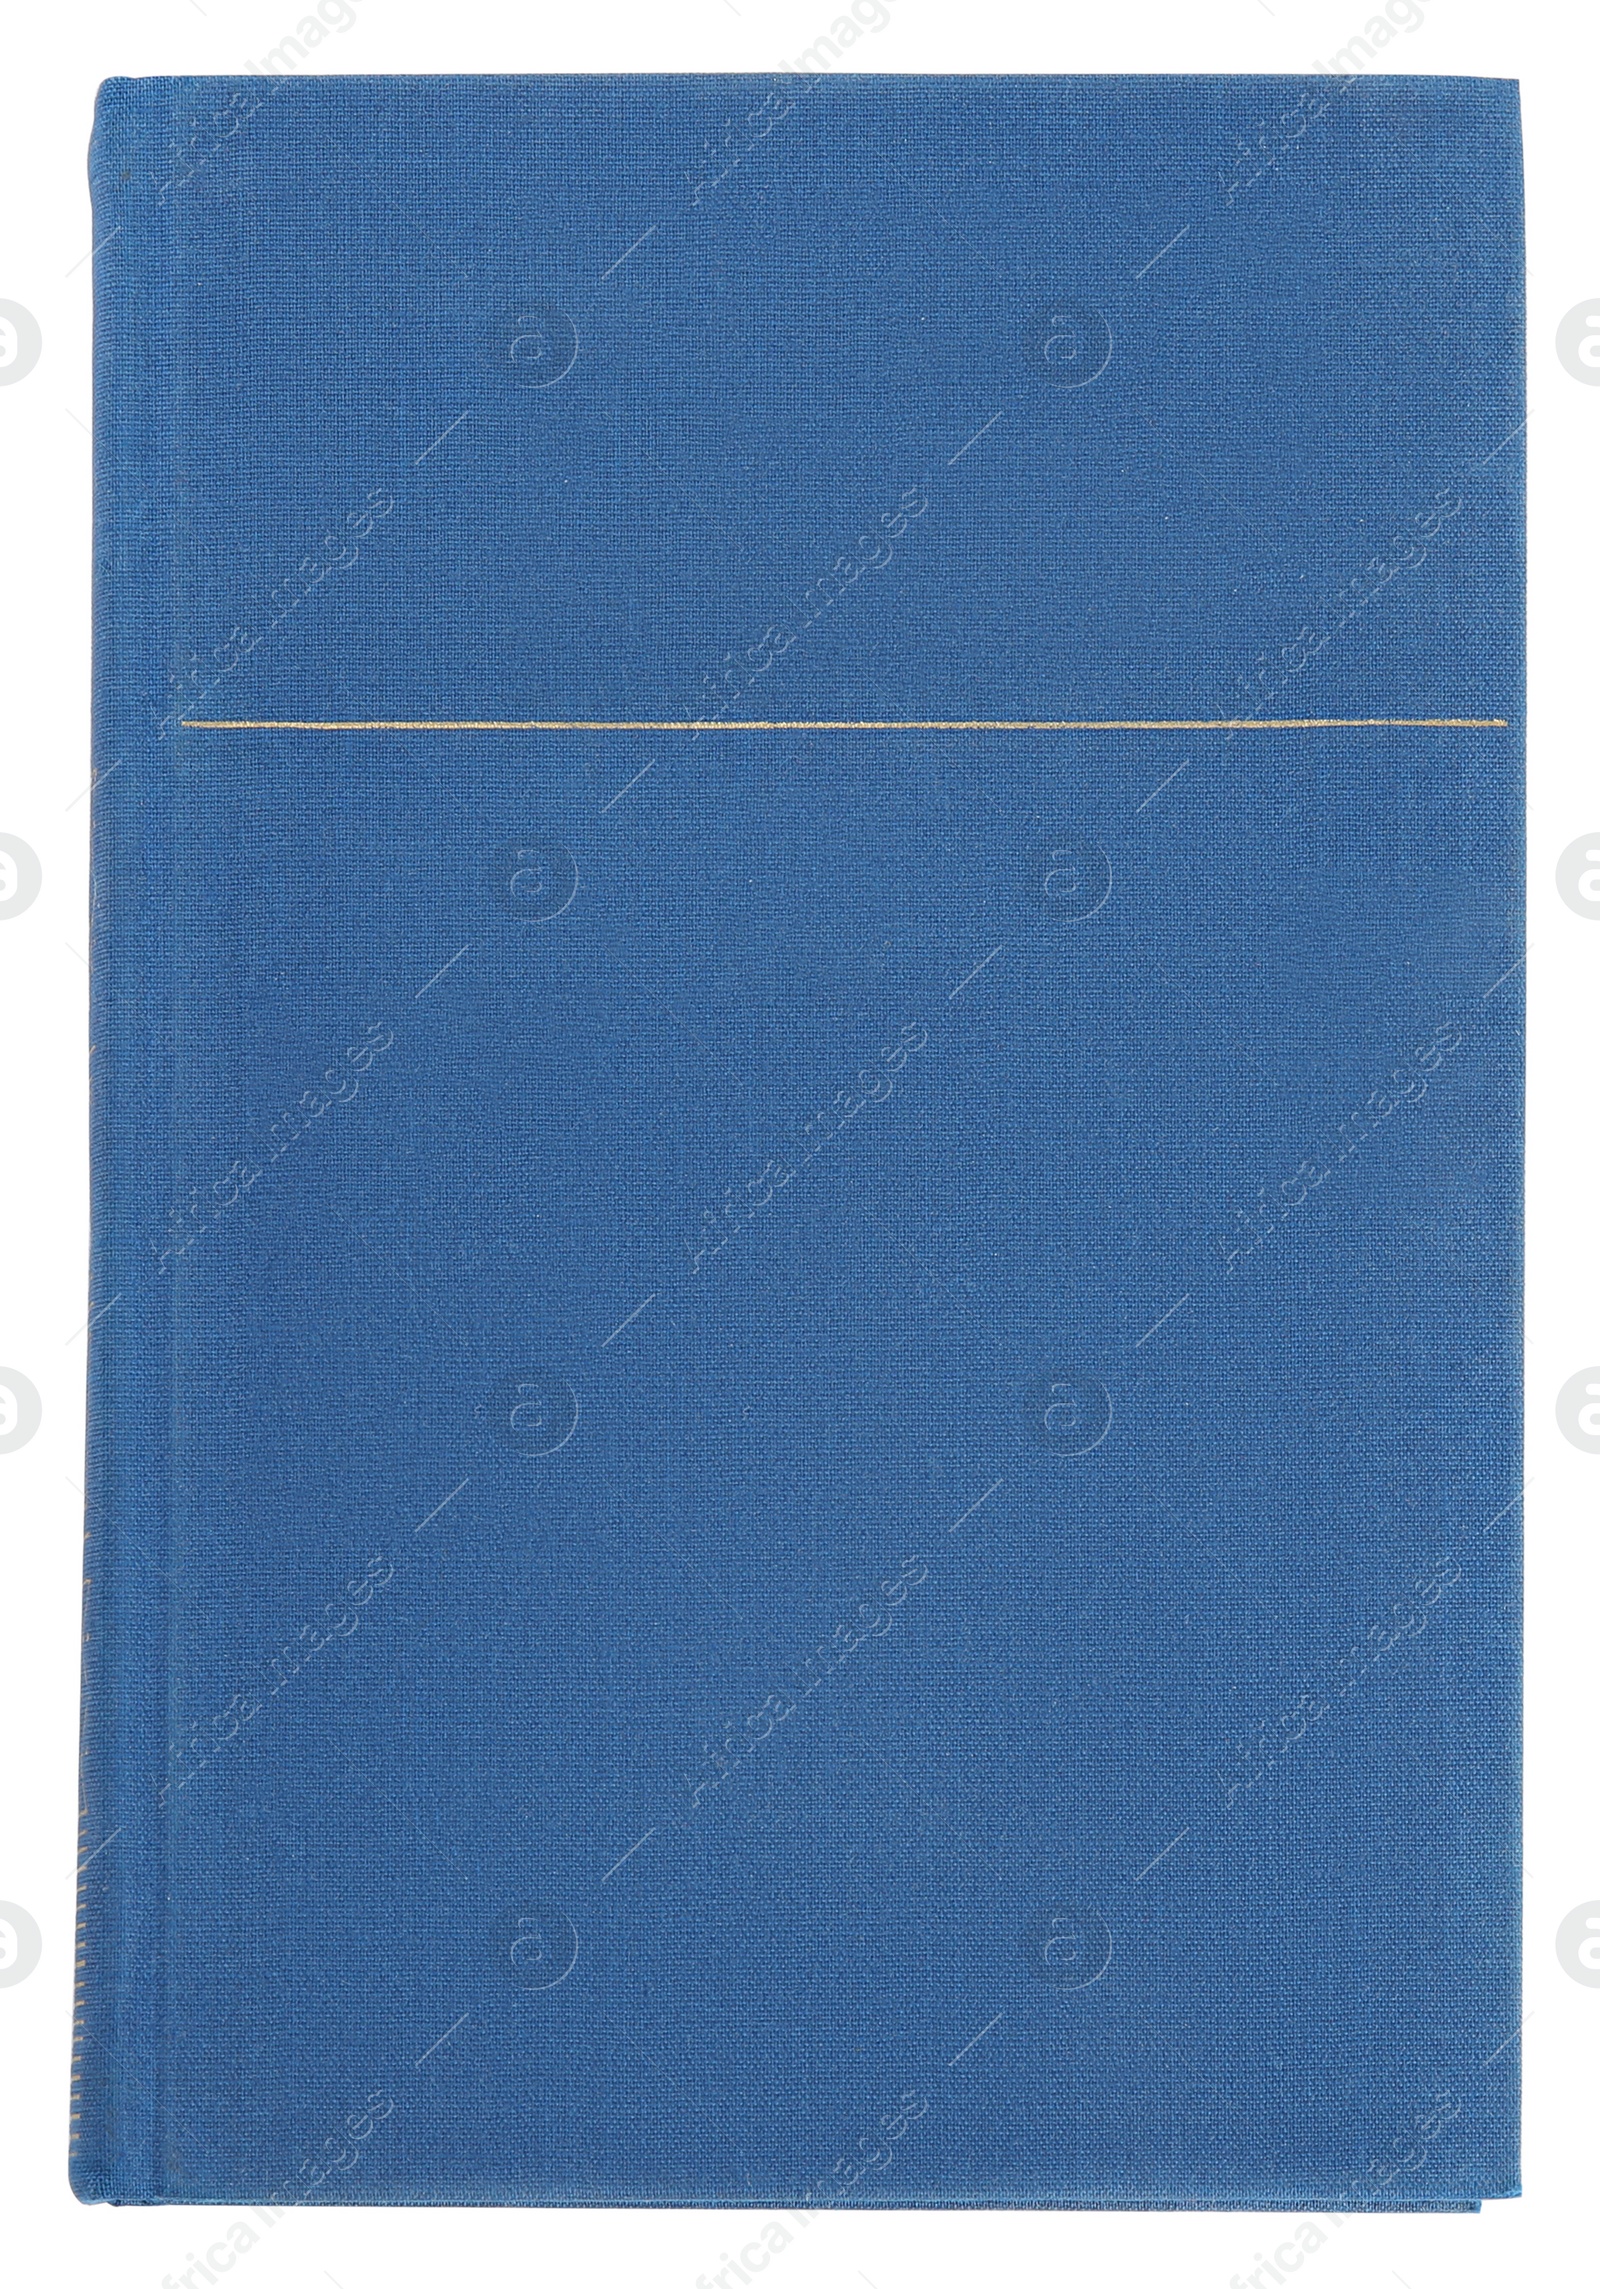 Photo of Closed color hardcover book isolated on white, top view